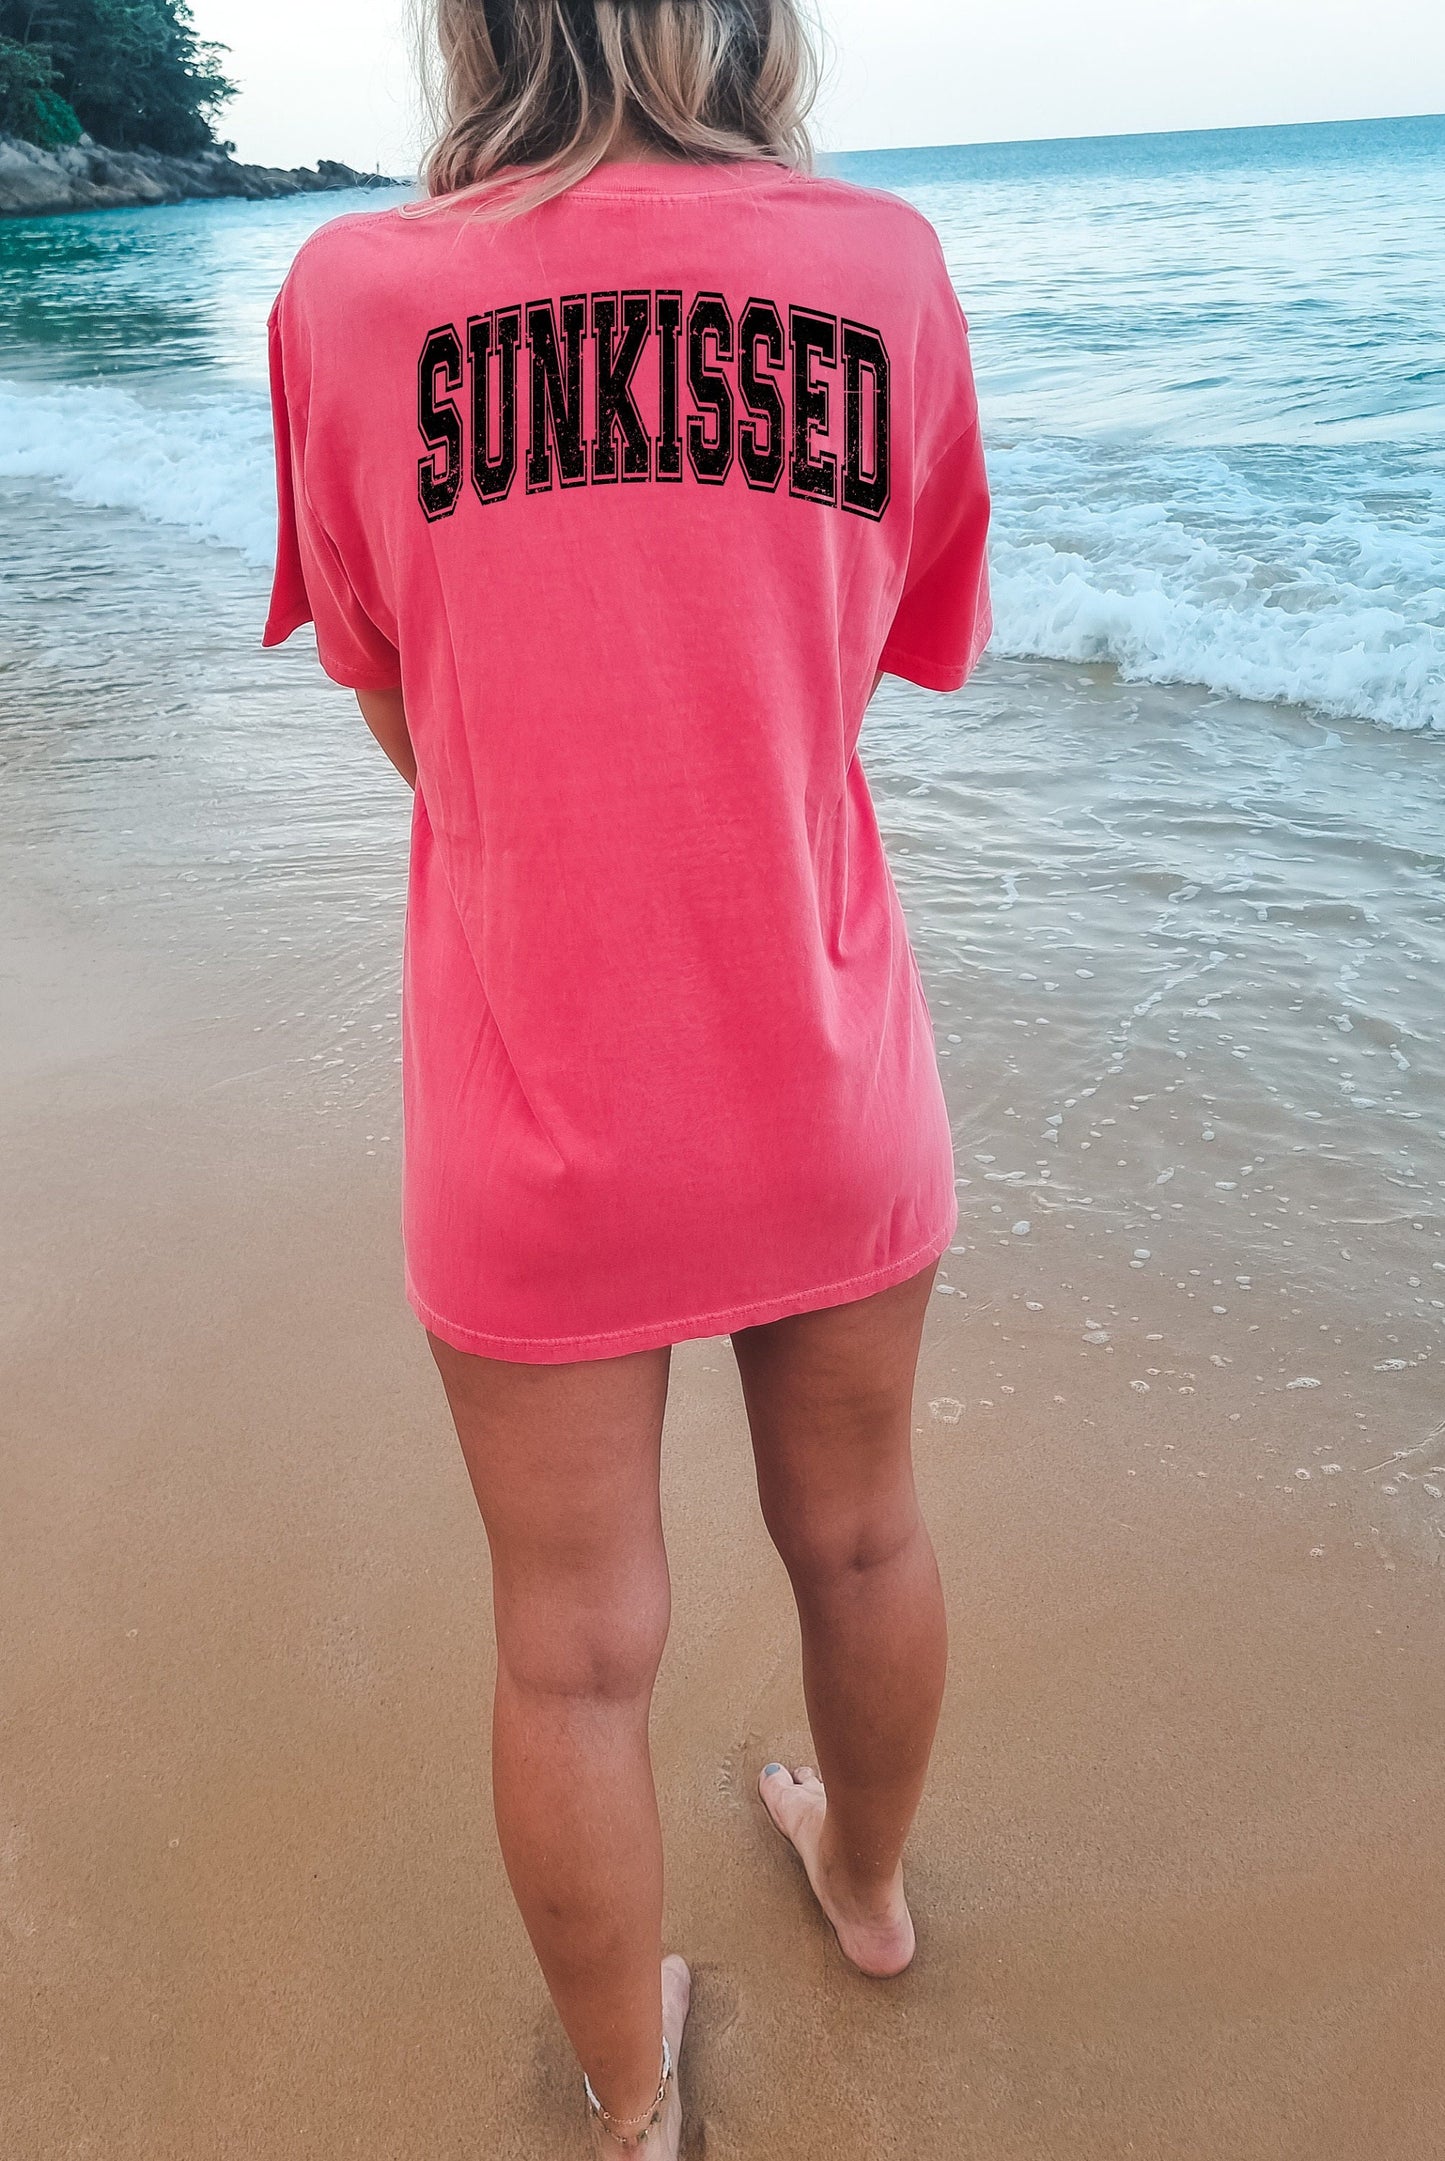 Beachy Sunkissed Distressed Tee - Summer Ready Top for Your Wardrobe